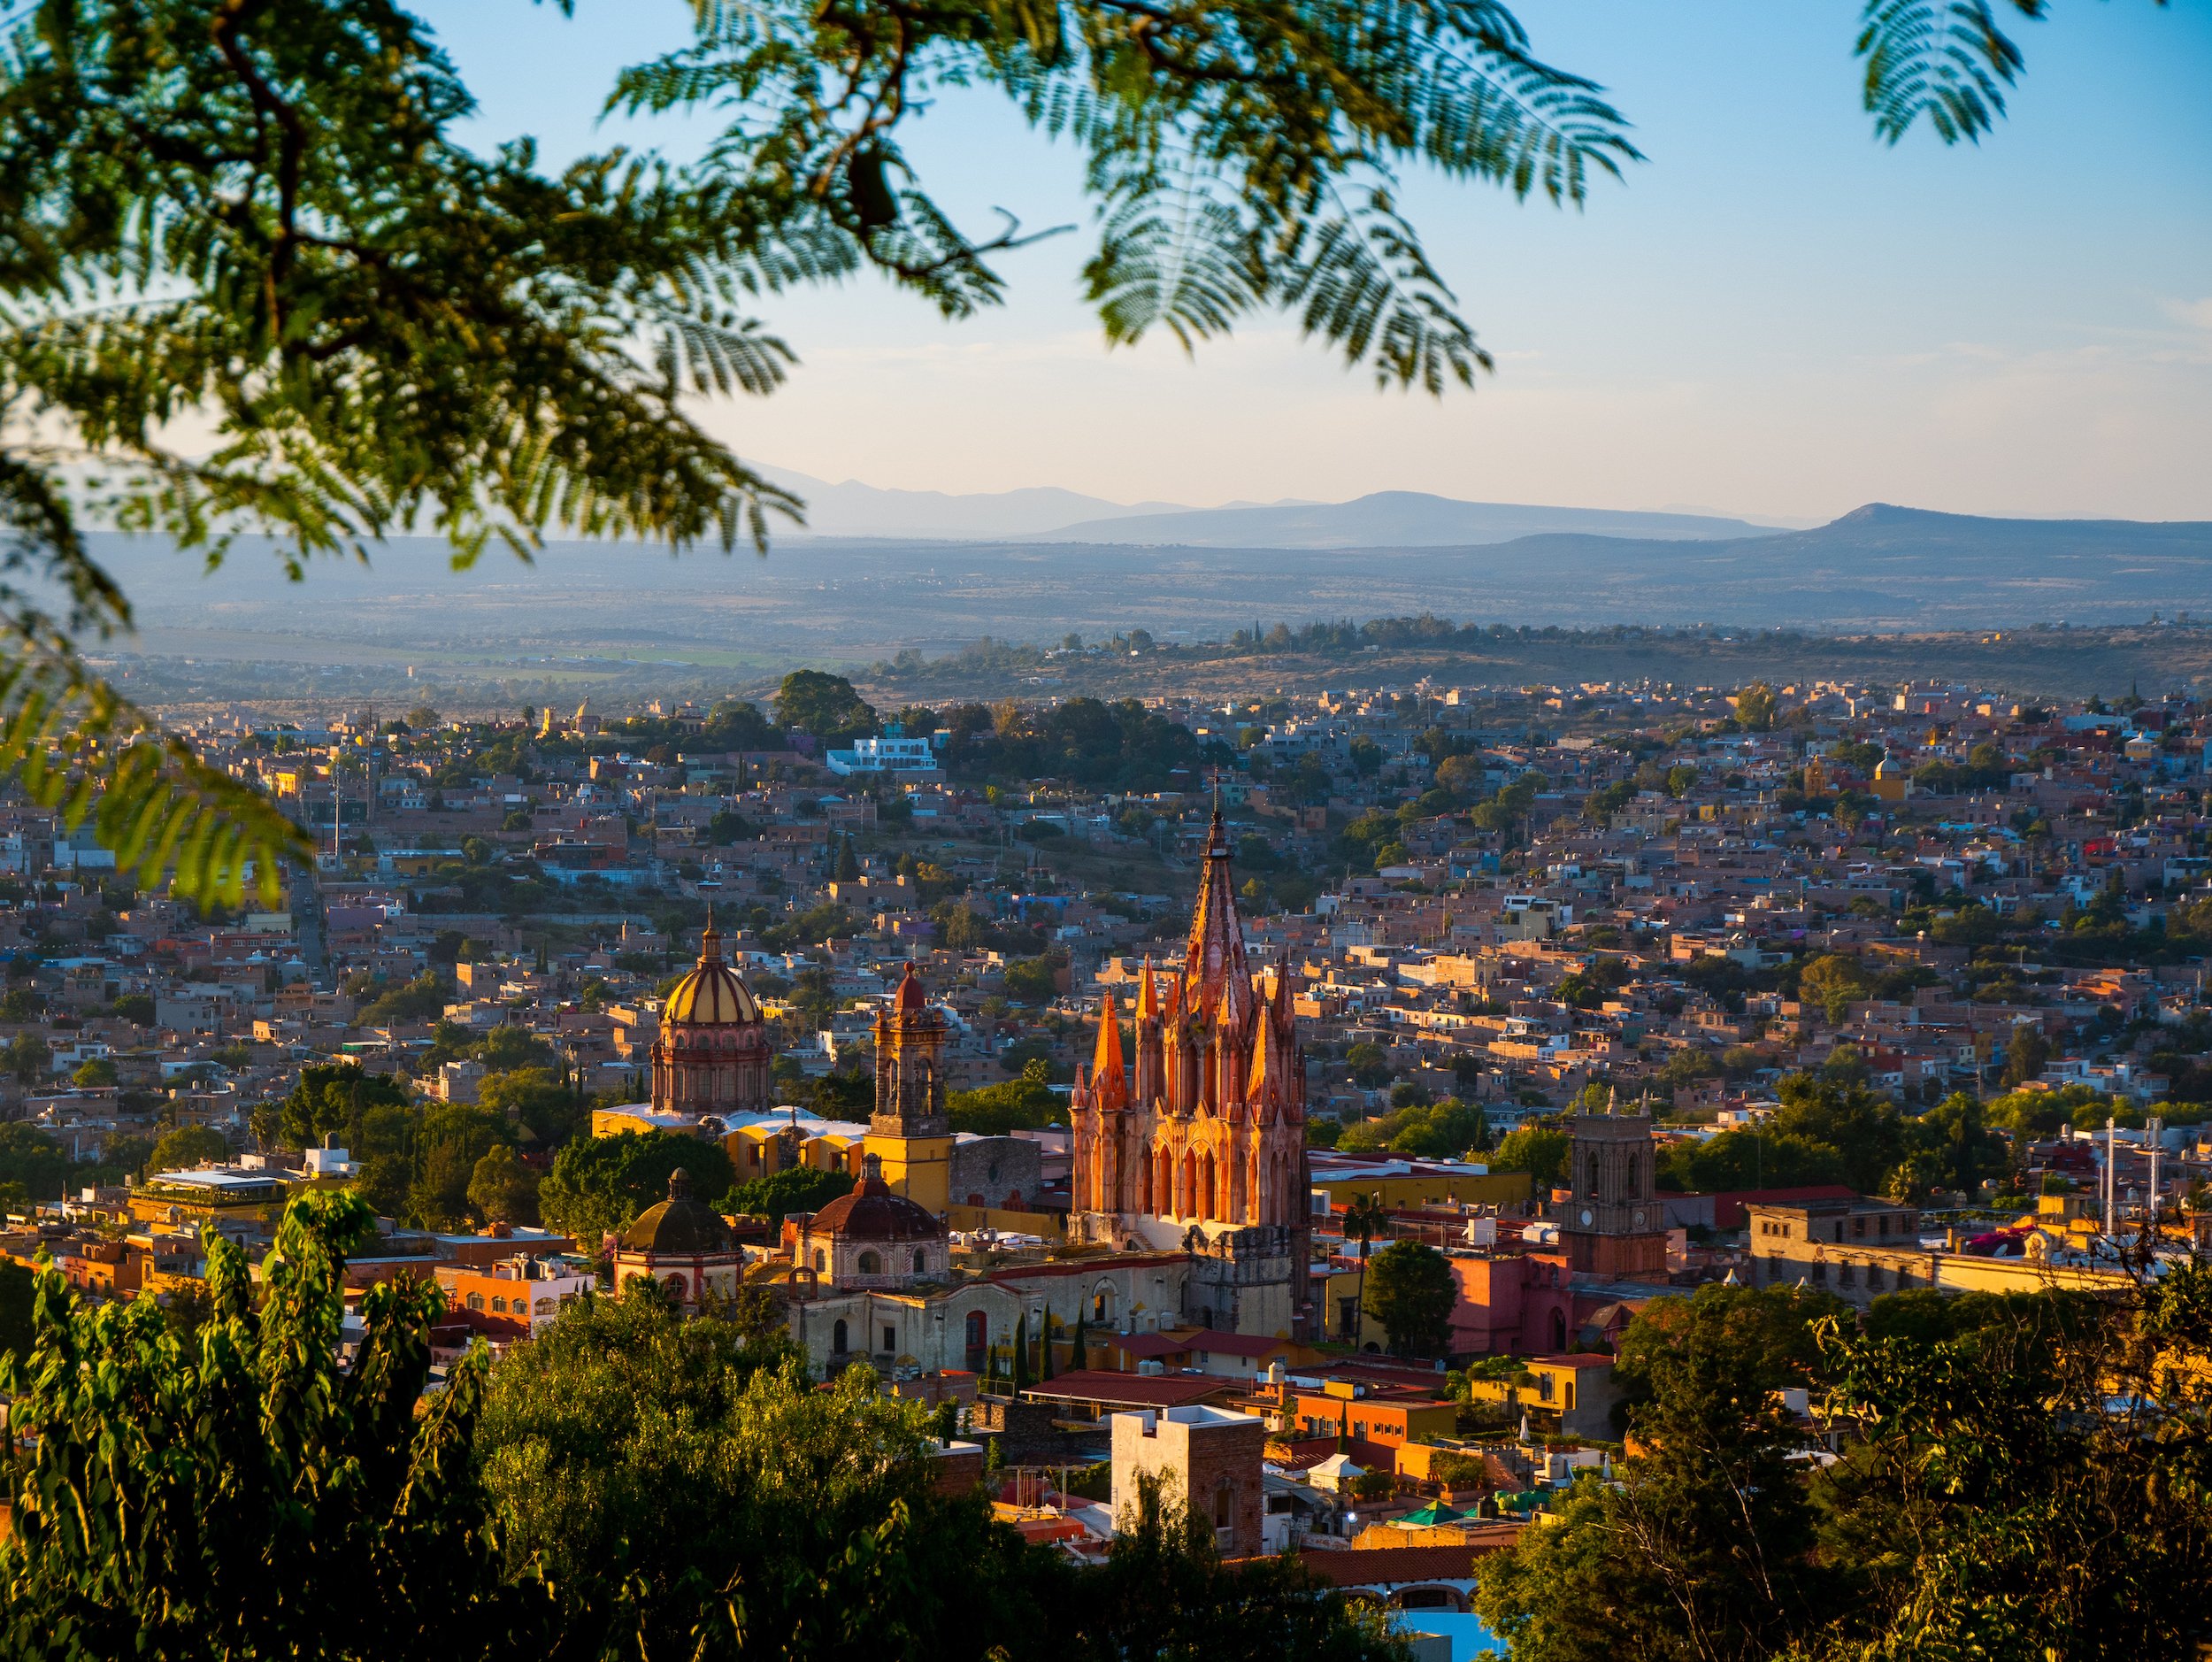 Birds eye view of San Miguel de Allende with leafs above in foreground